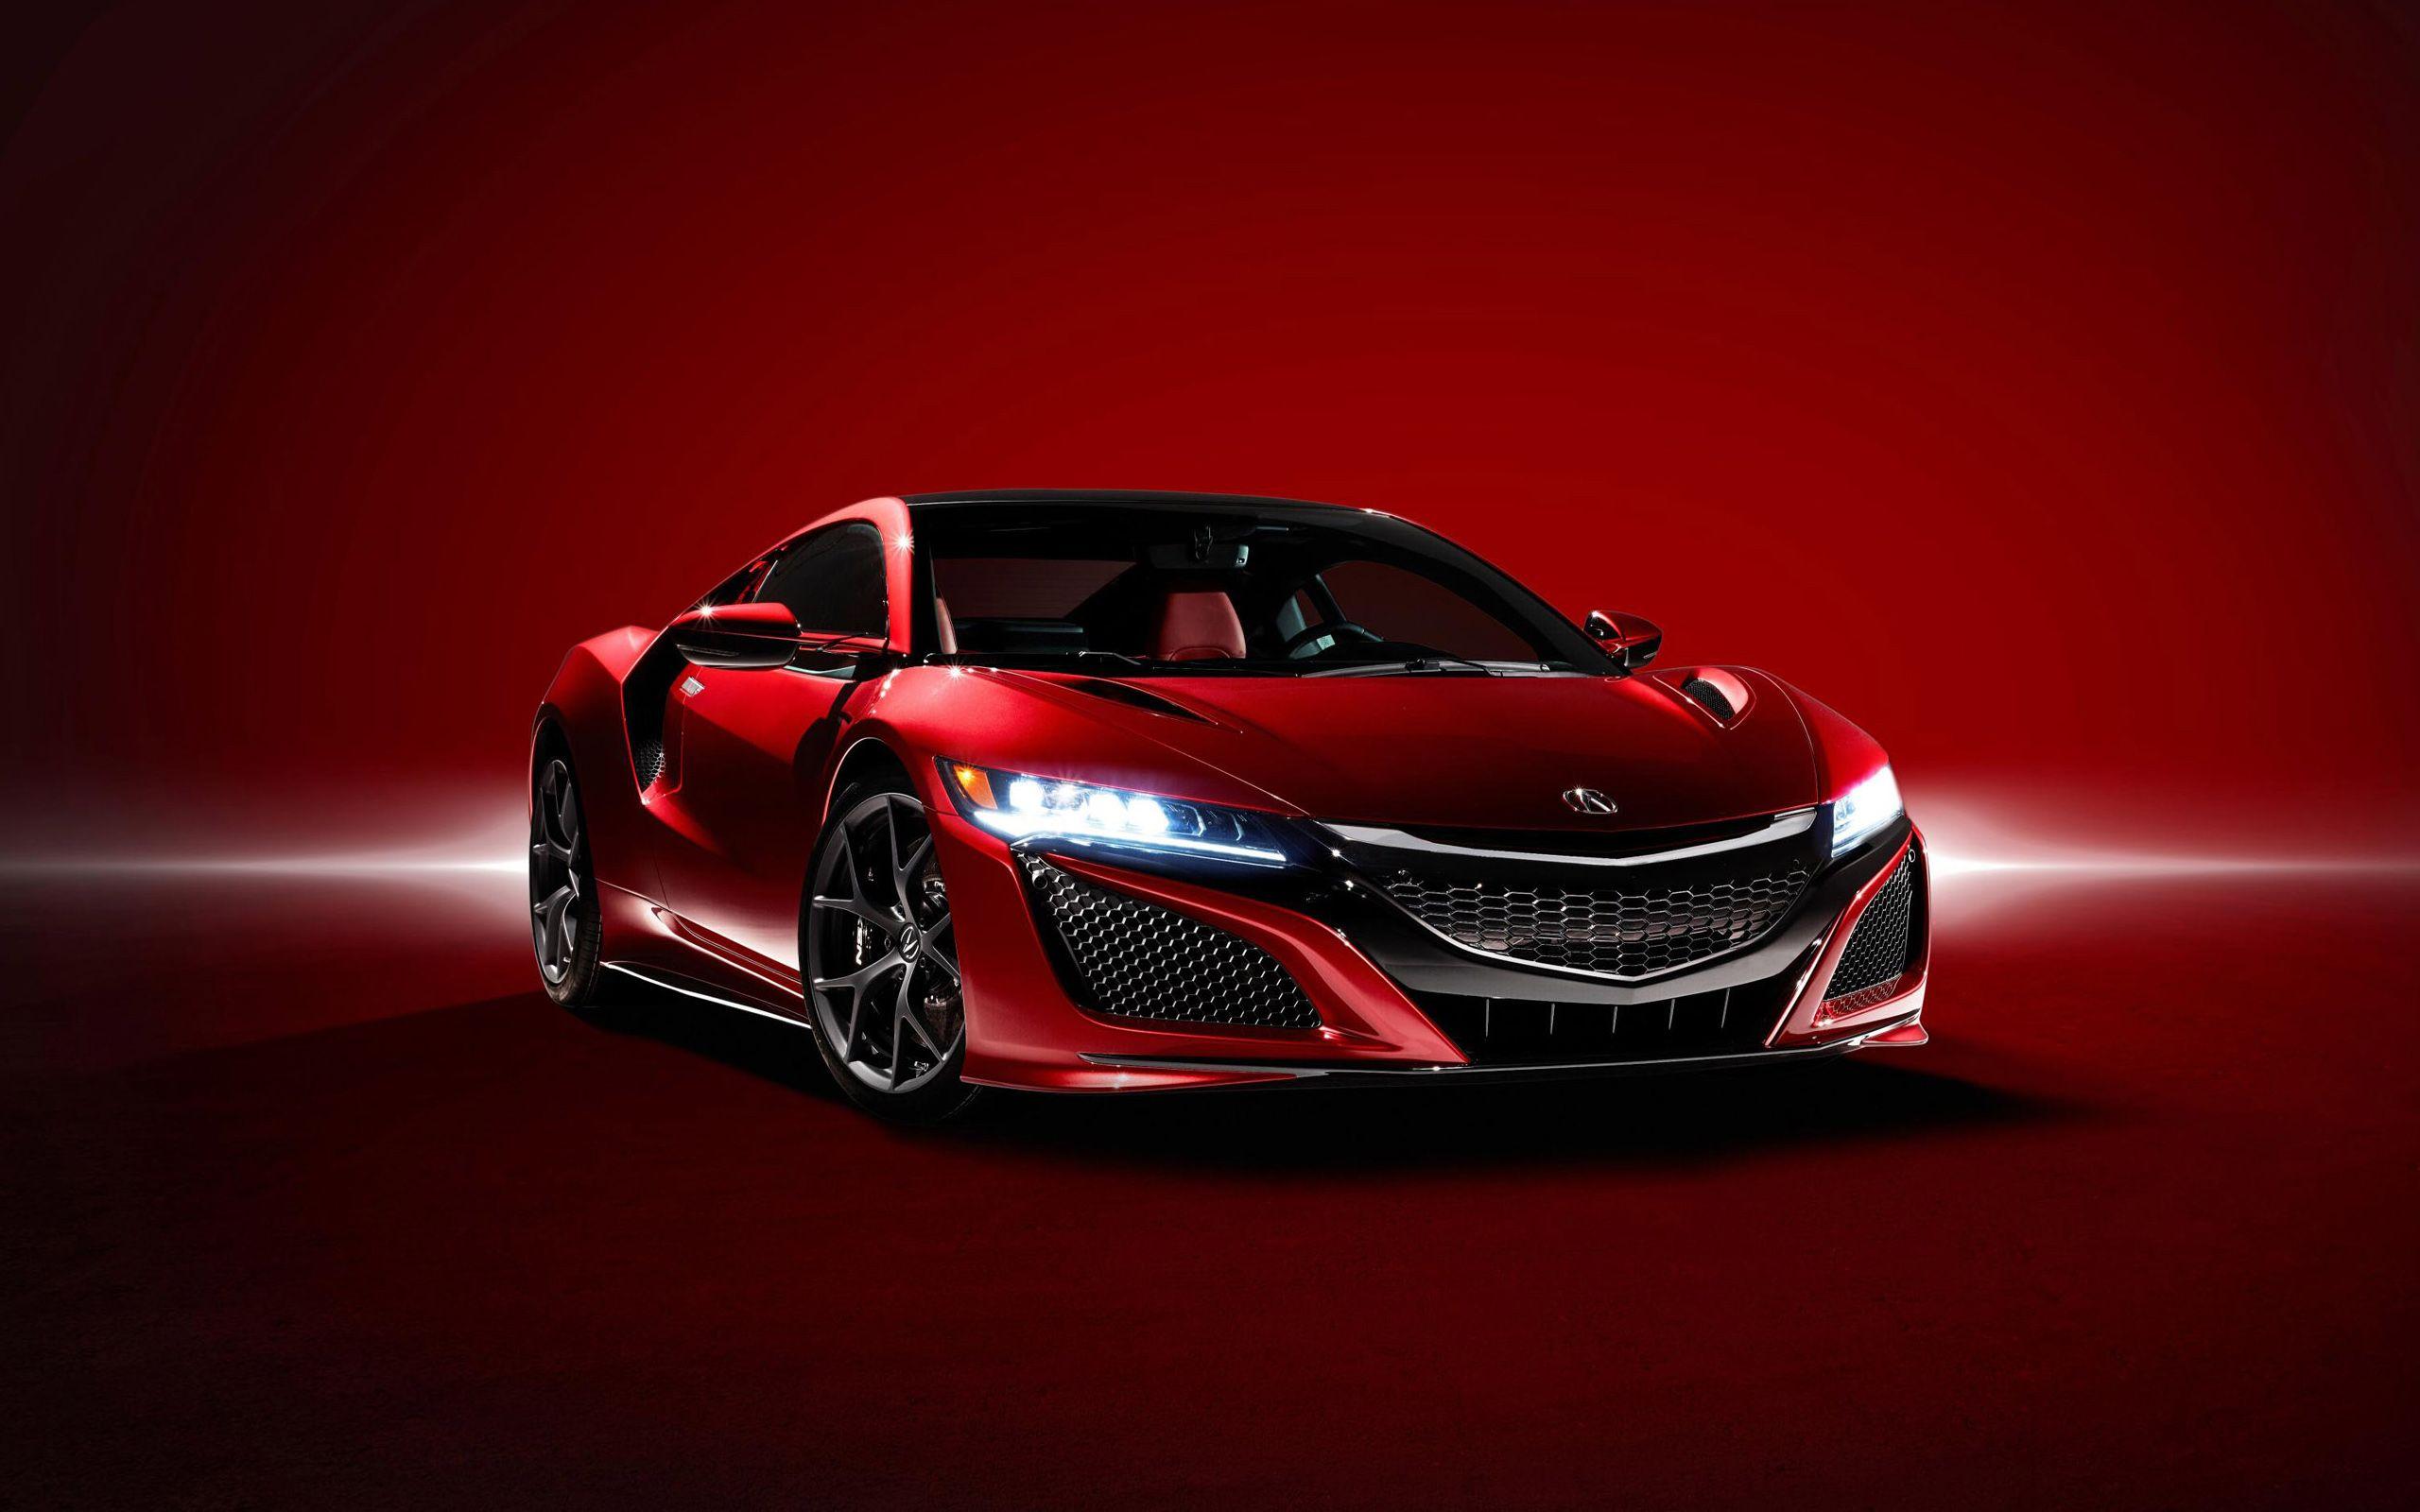 Acura NSX 2016 HD wallpaper free download